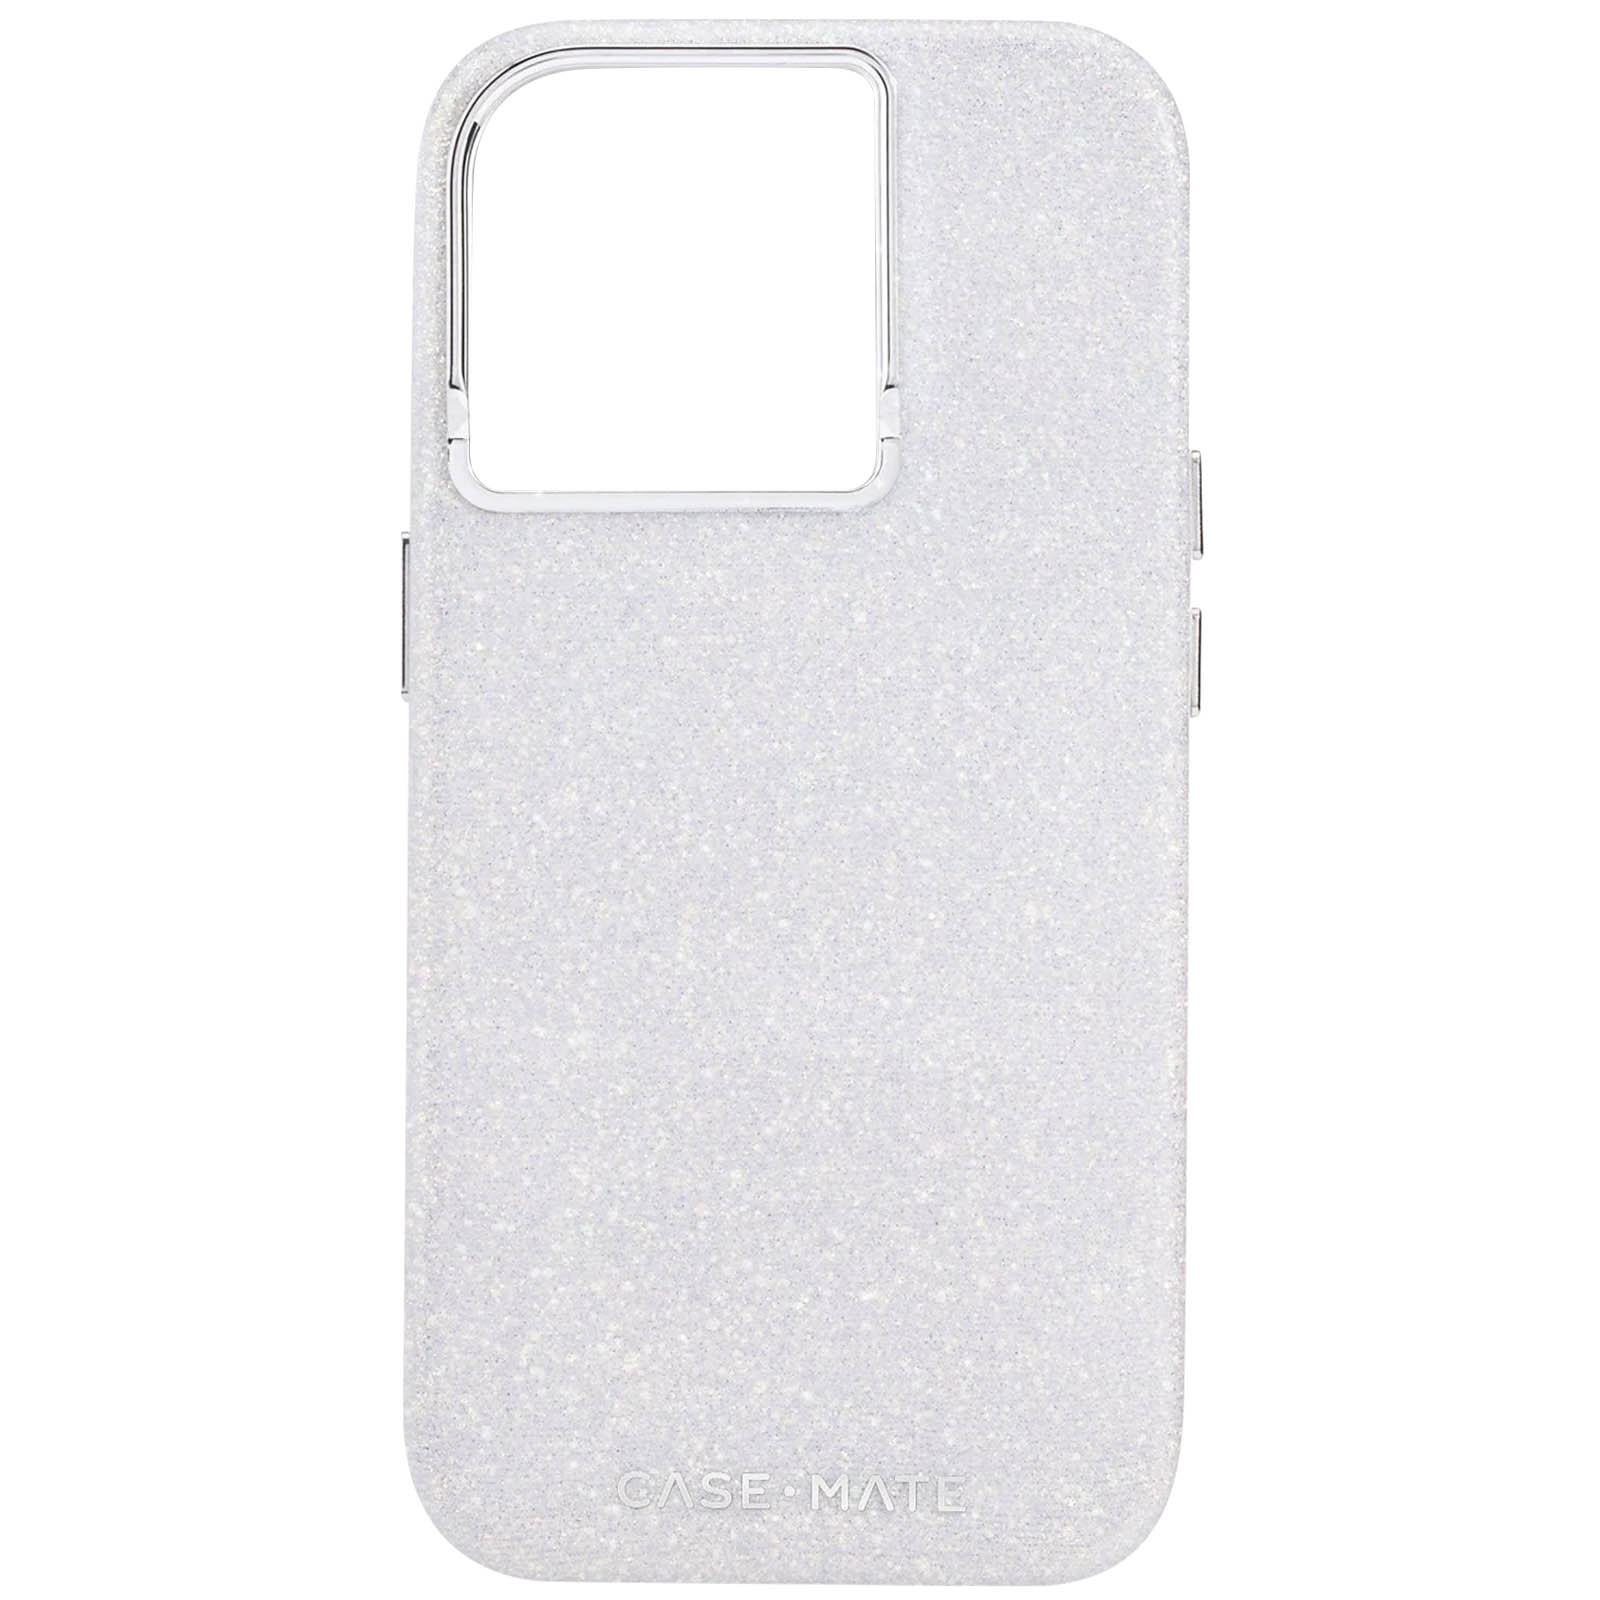 Series, Backcover, Pro iPhone Max, Glitter 15 Silber CASE-MATE Apple,